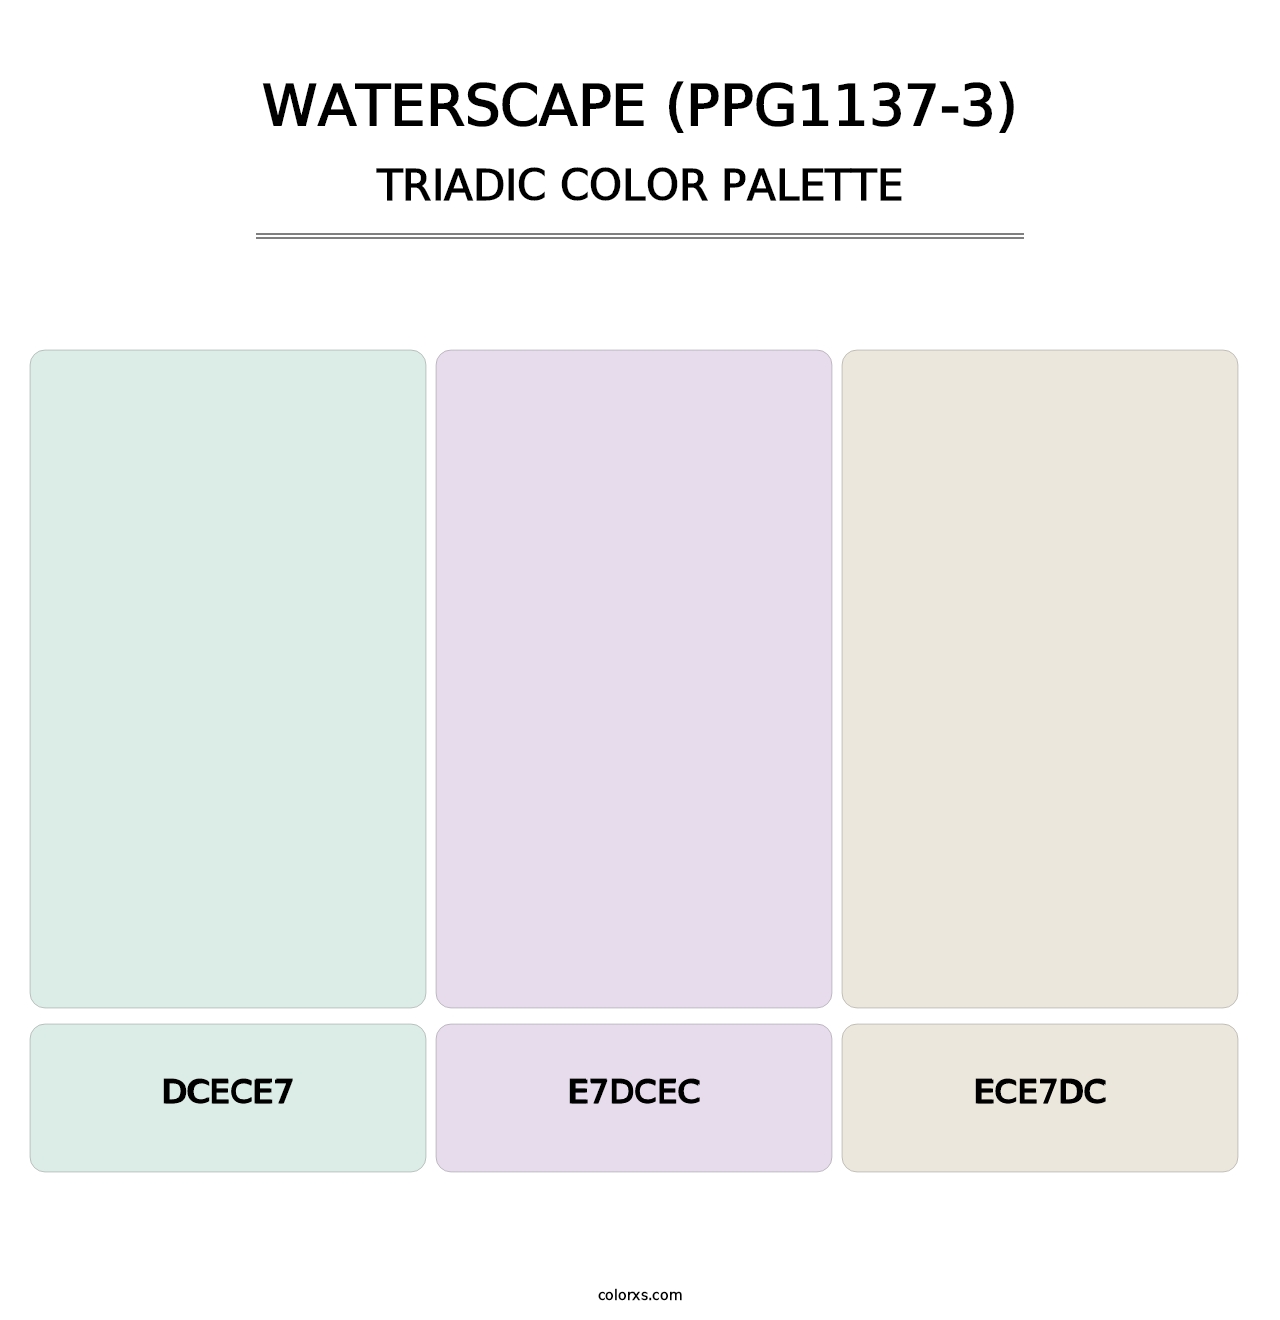 Waterscape (PPG1137-3) - Triadic Color Palette